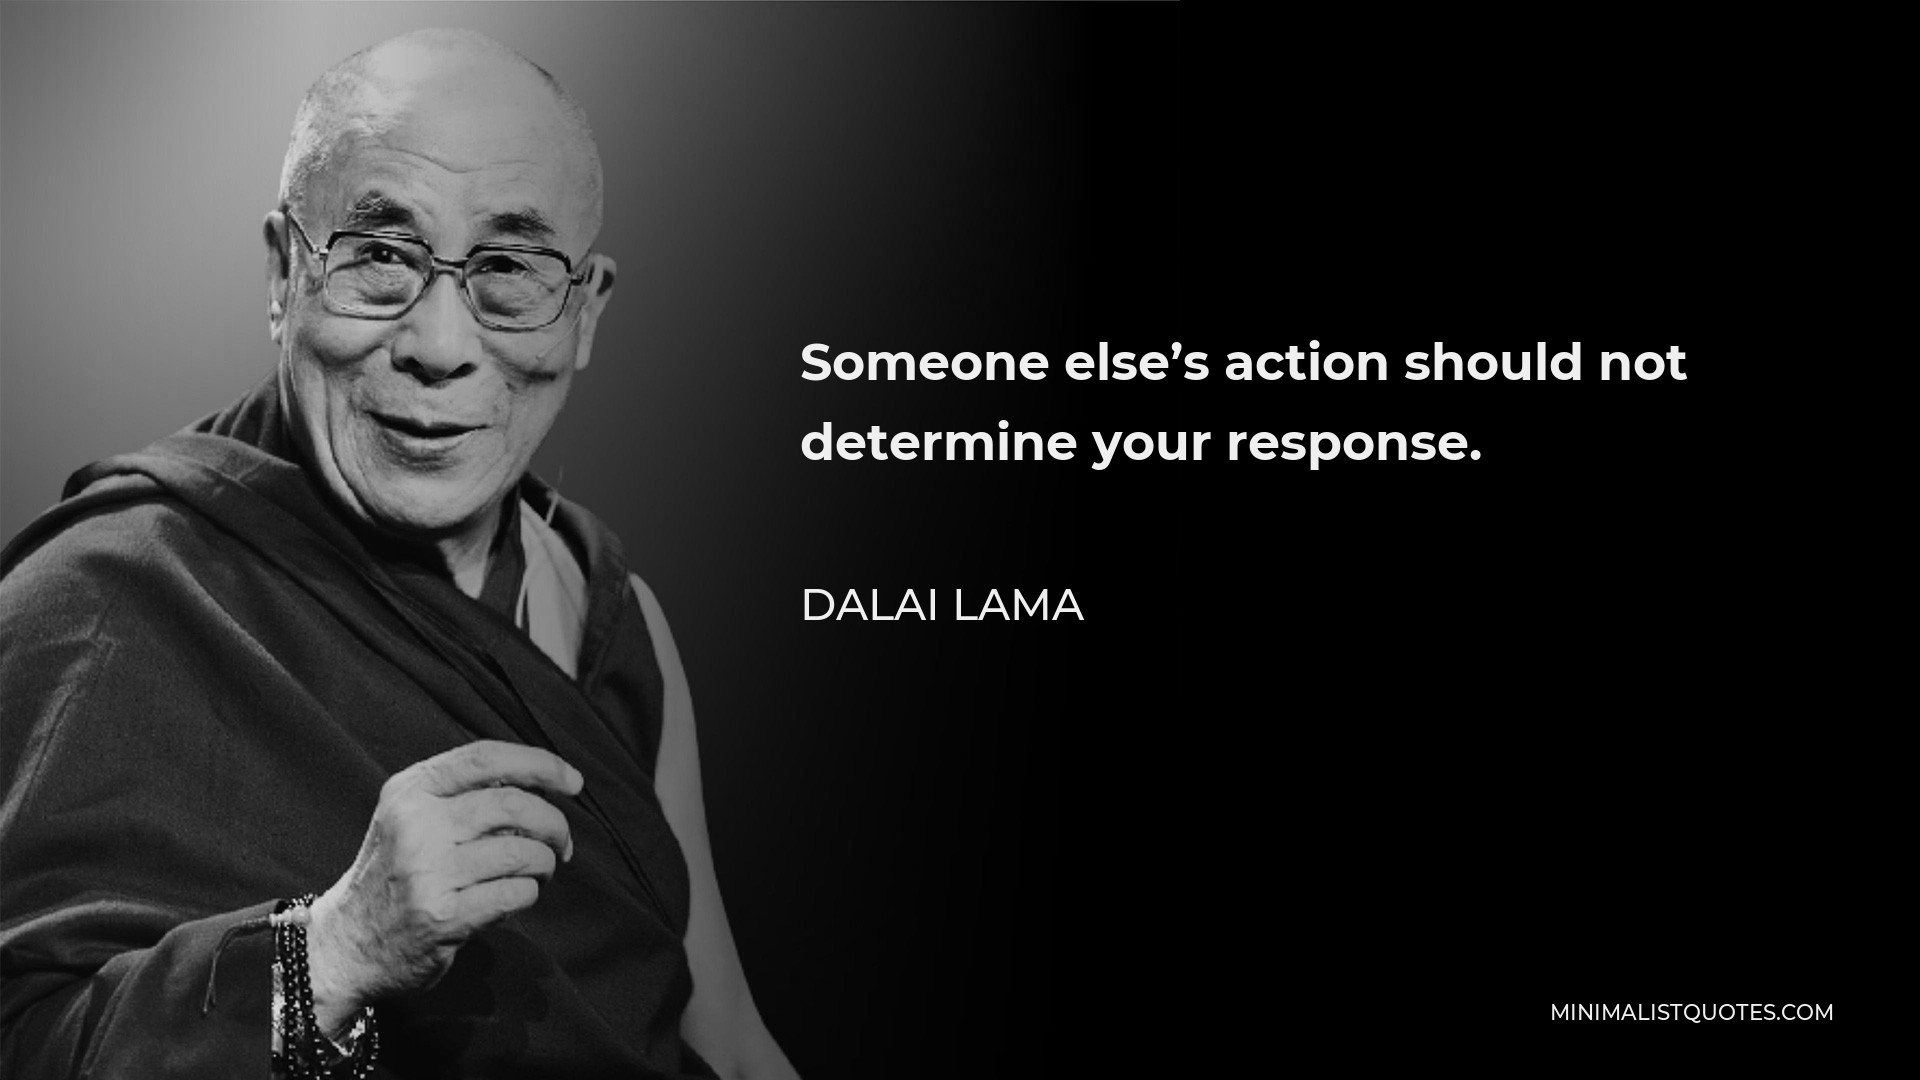 Dalai Lama Quote - Someone else’s action should not determine your response.